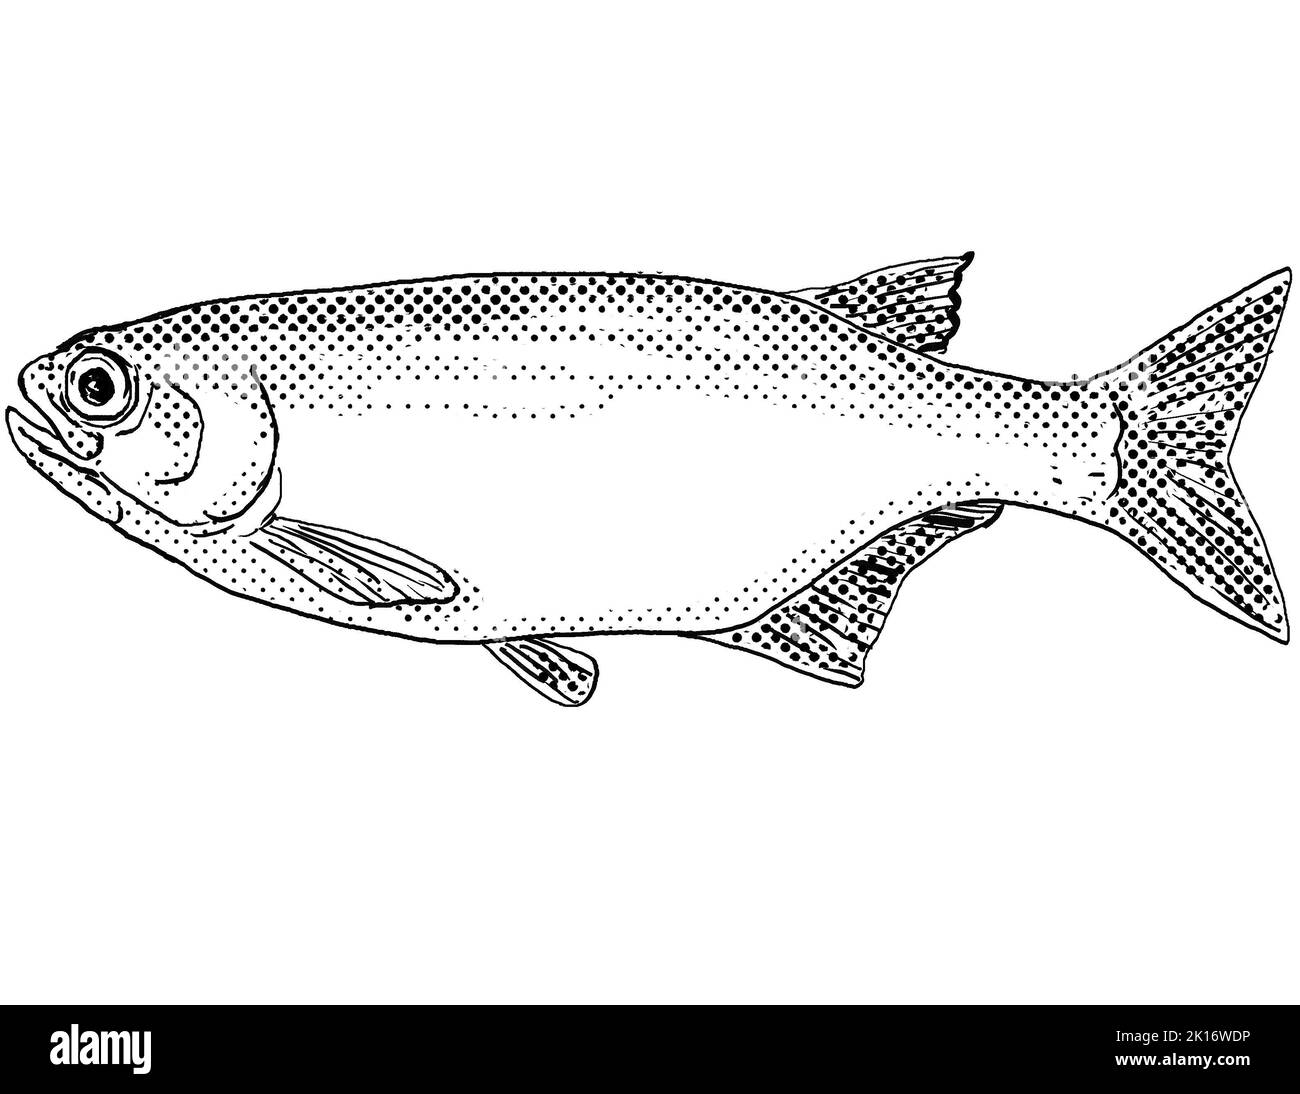 Cartoon style line drawing of a goldeye or Hiodon alosoides, a freshwater fish endemic to North America with halftone dots shading on isolated backgro Stock Photo